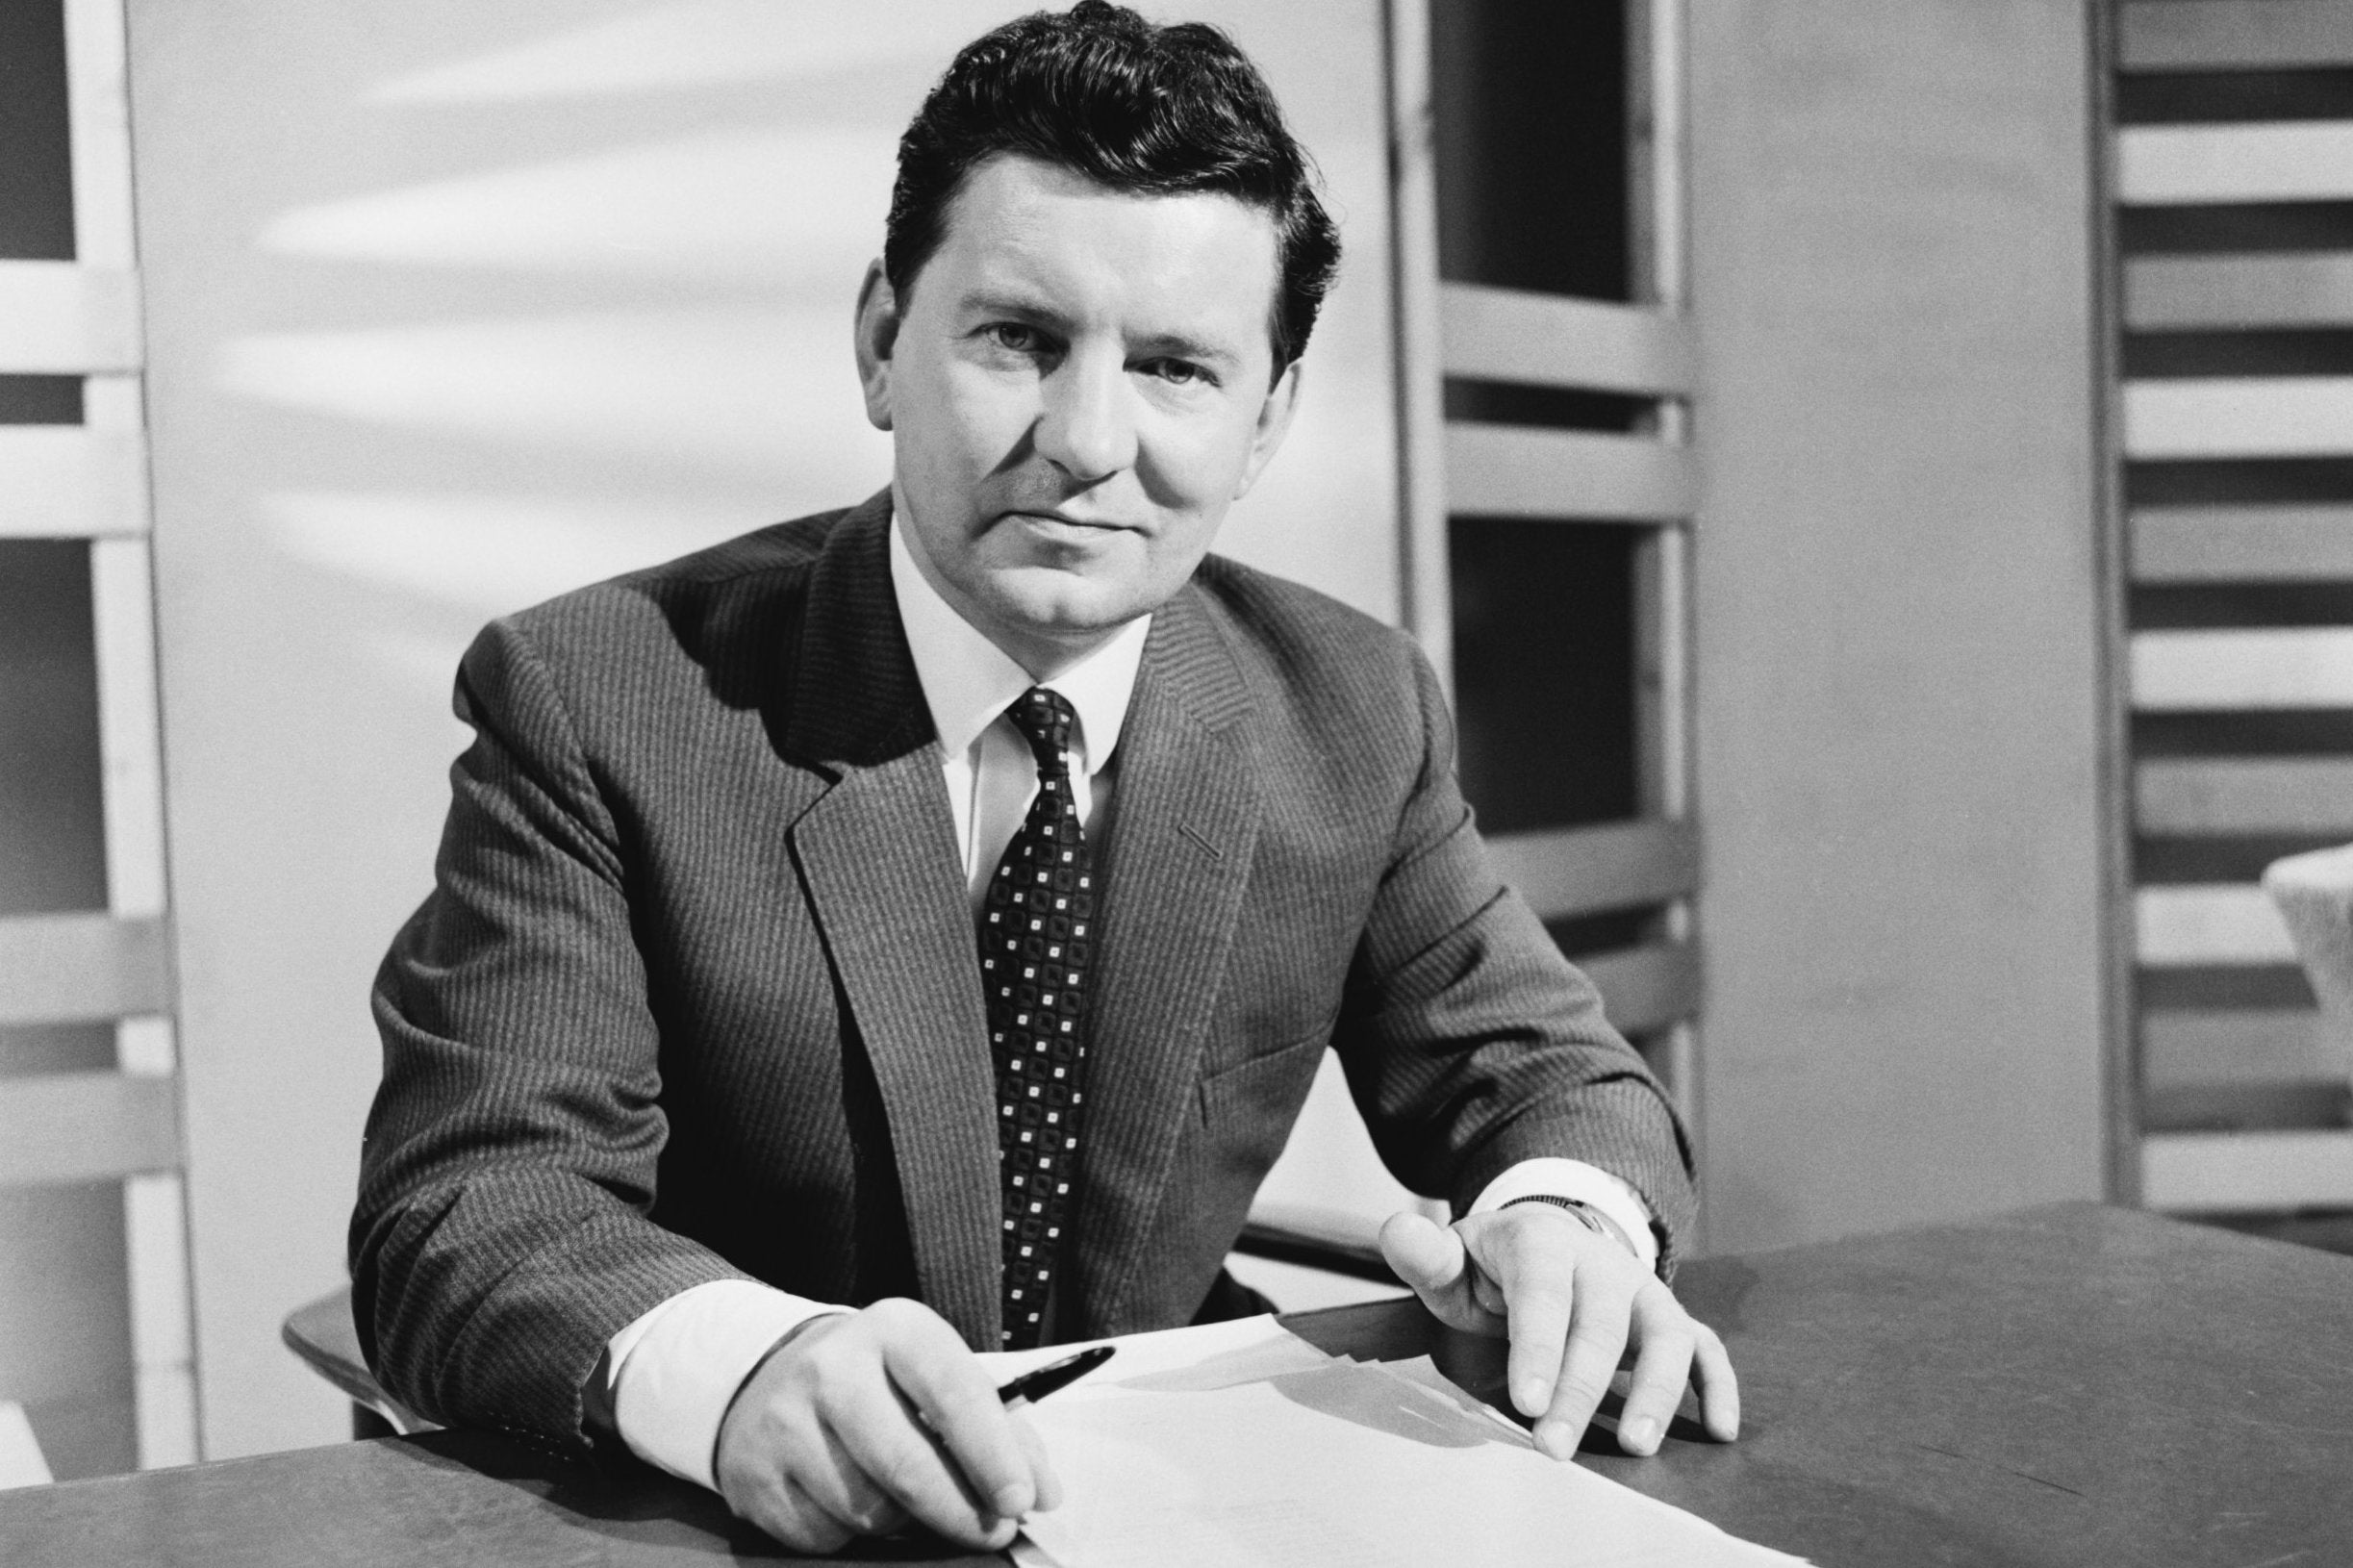 Baker worked as a BBC newsreader from 1954 to 1982, his cause of death has not yet been reported